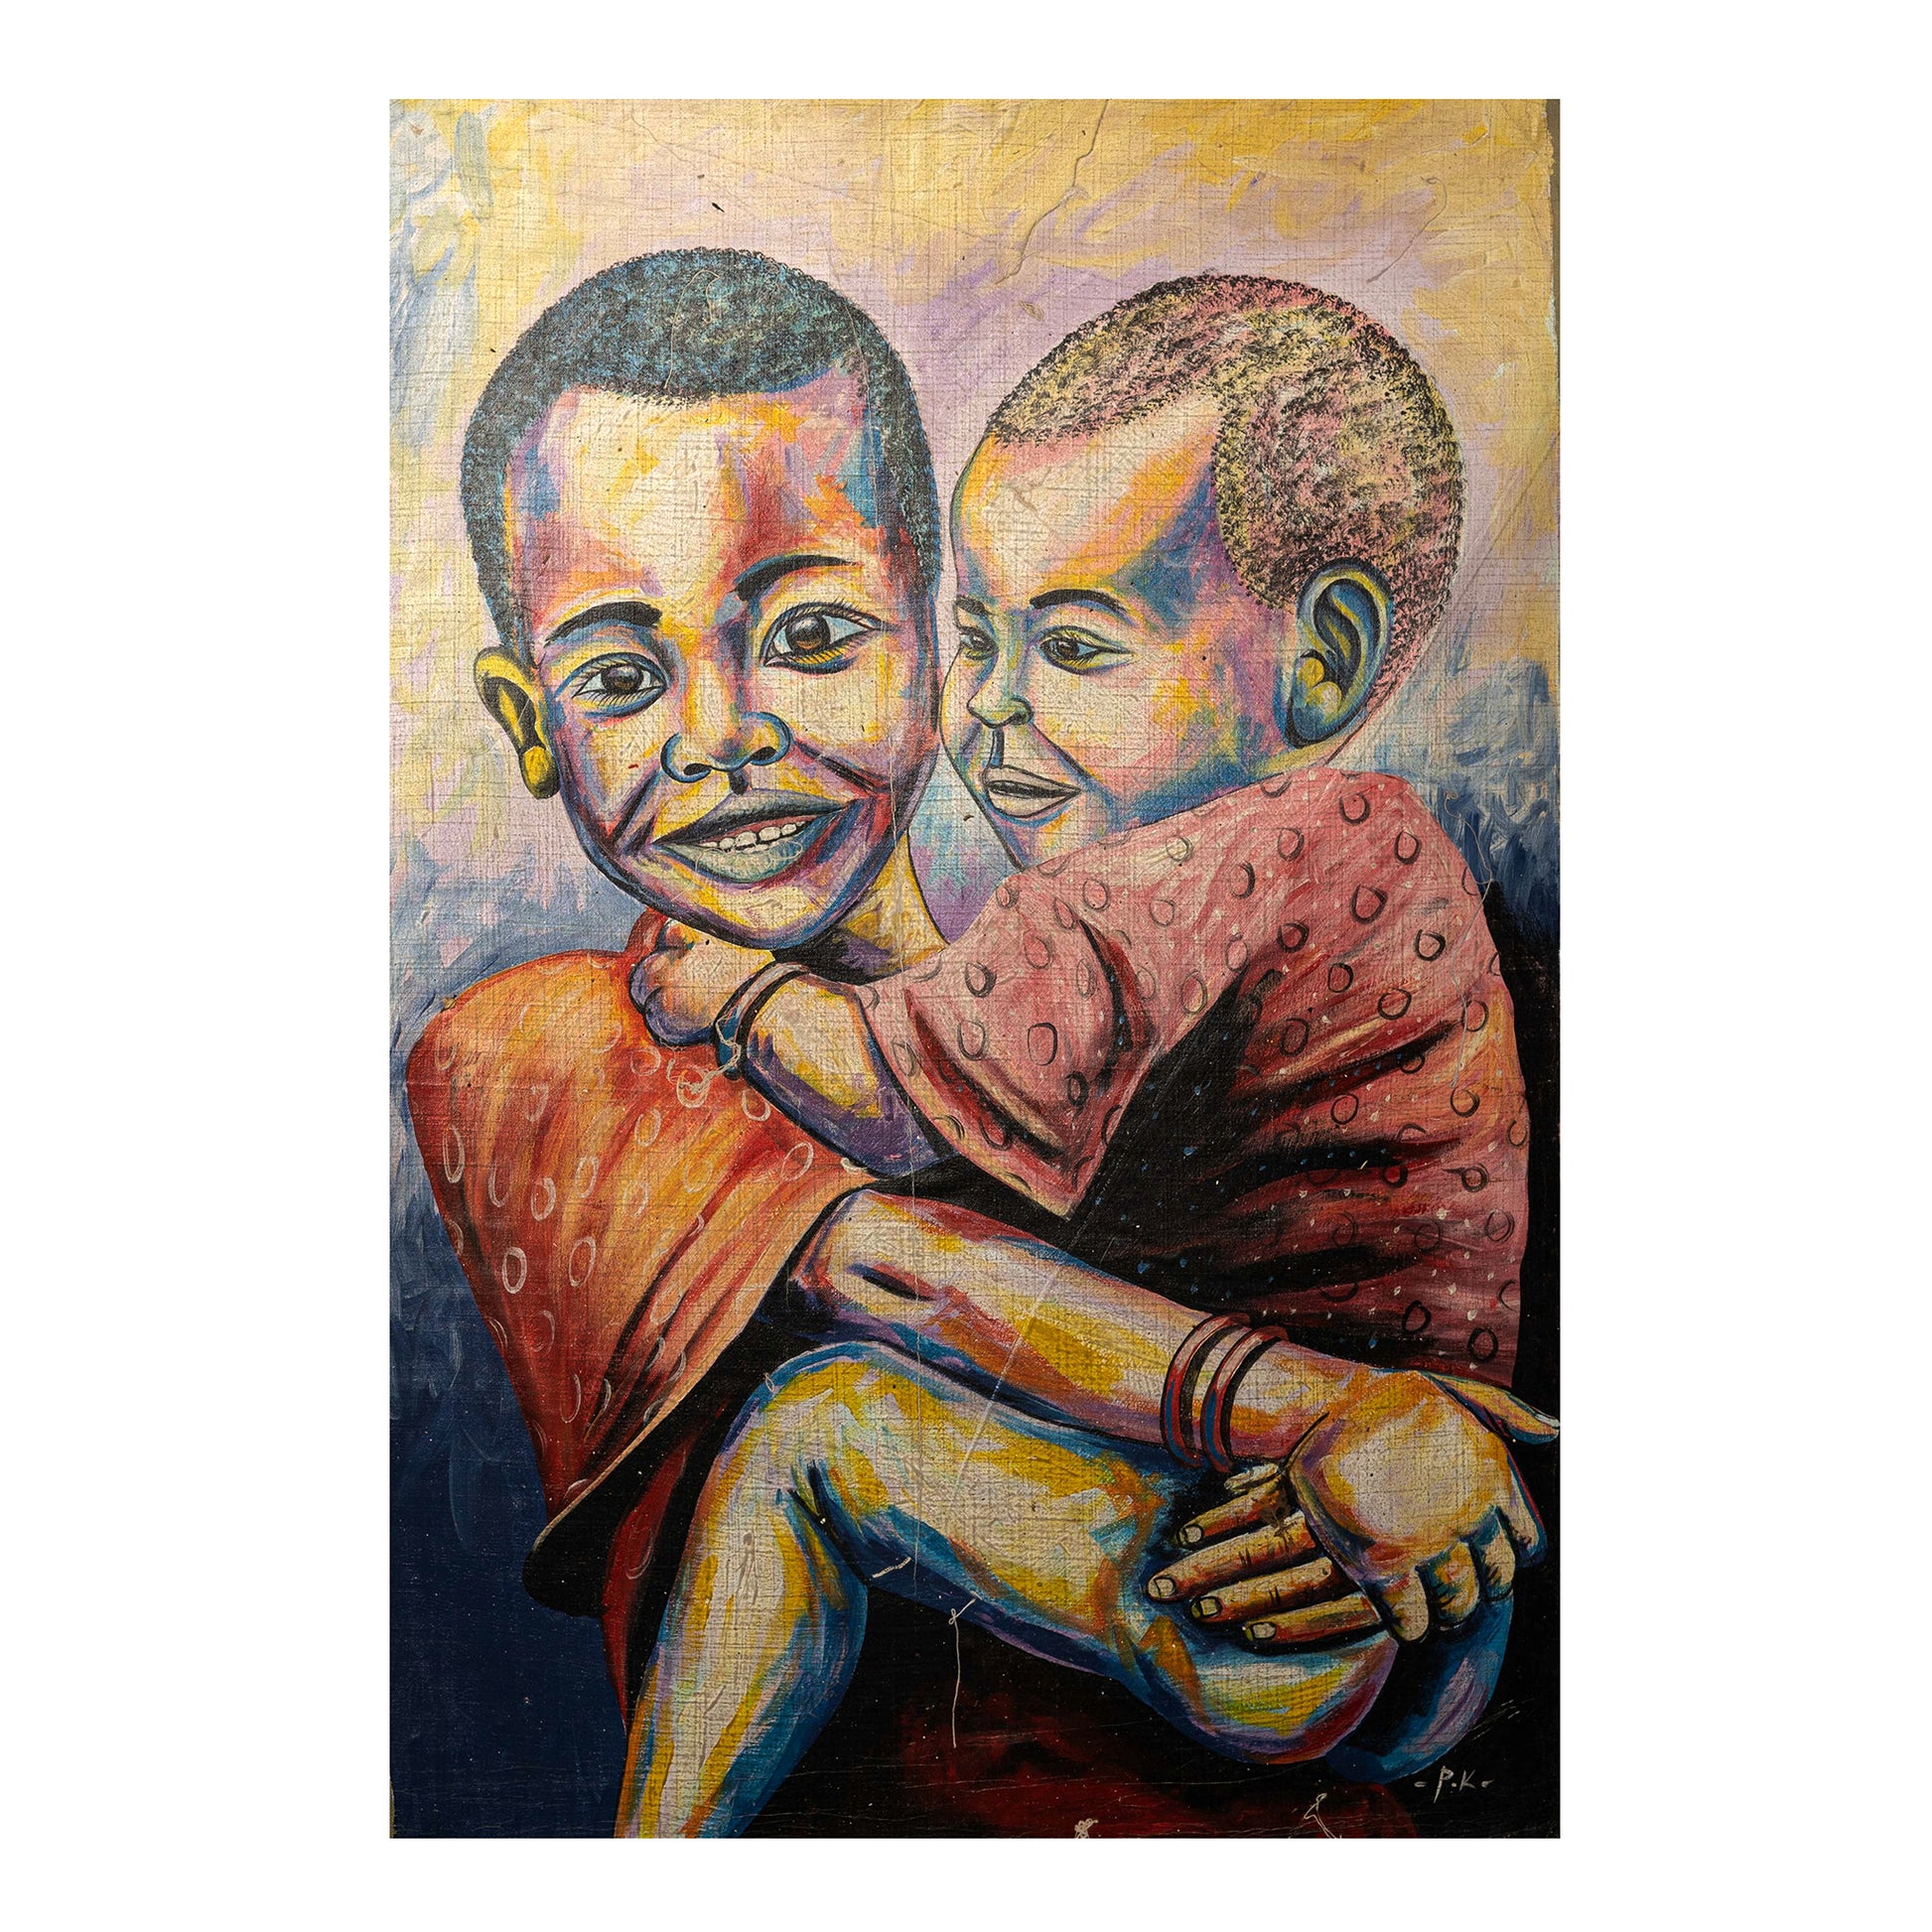 Brothers keeper - Authentic African handicrafts | Clothing, bags, painting, toys & more - CULTURE HUB by Muthoni Unchained